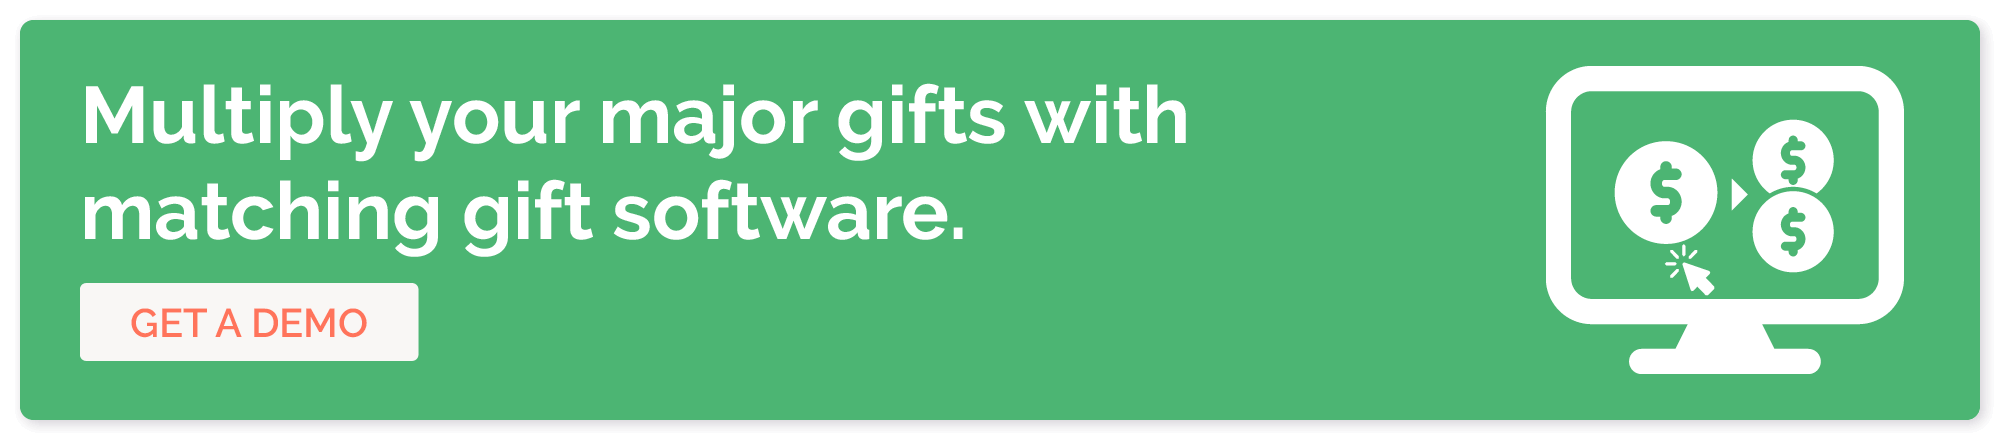 Get a demo of matching gift software to maximize your major gift donation revenue.